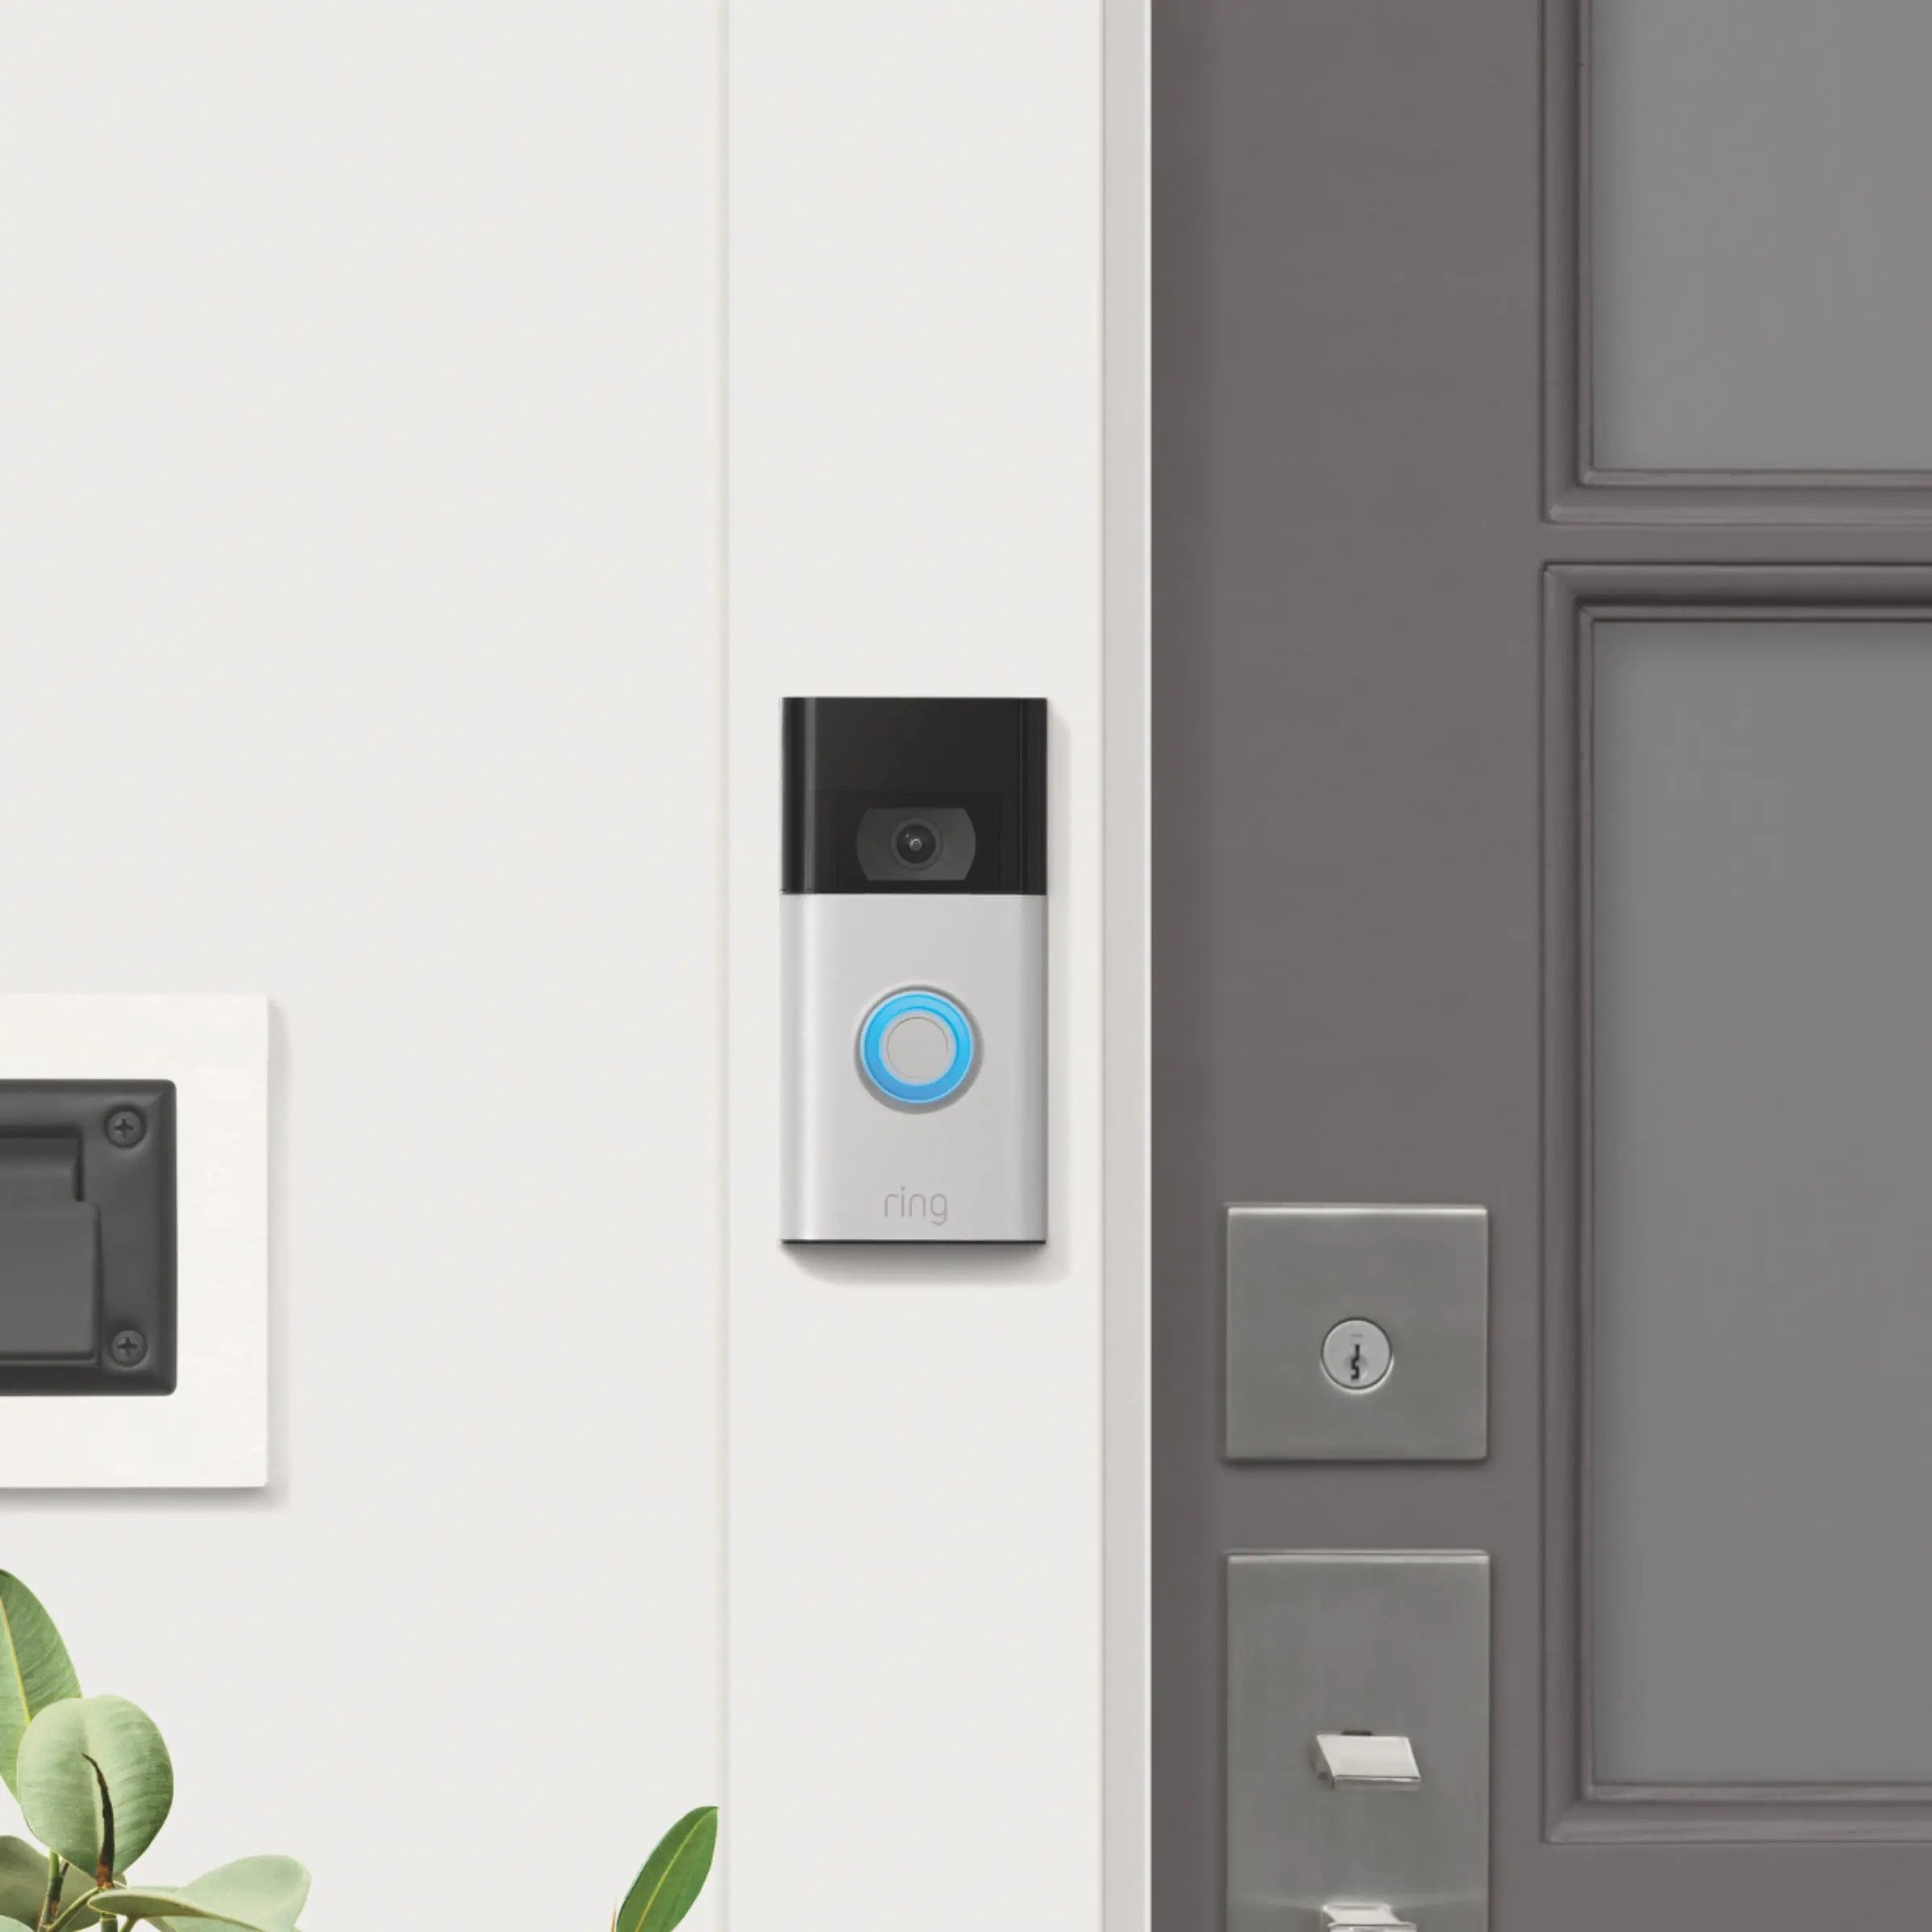 Ring Video Doorbell Pro Review | PCMag